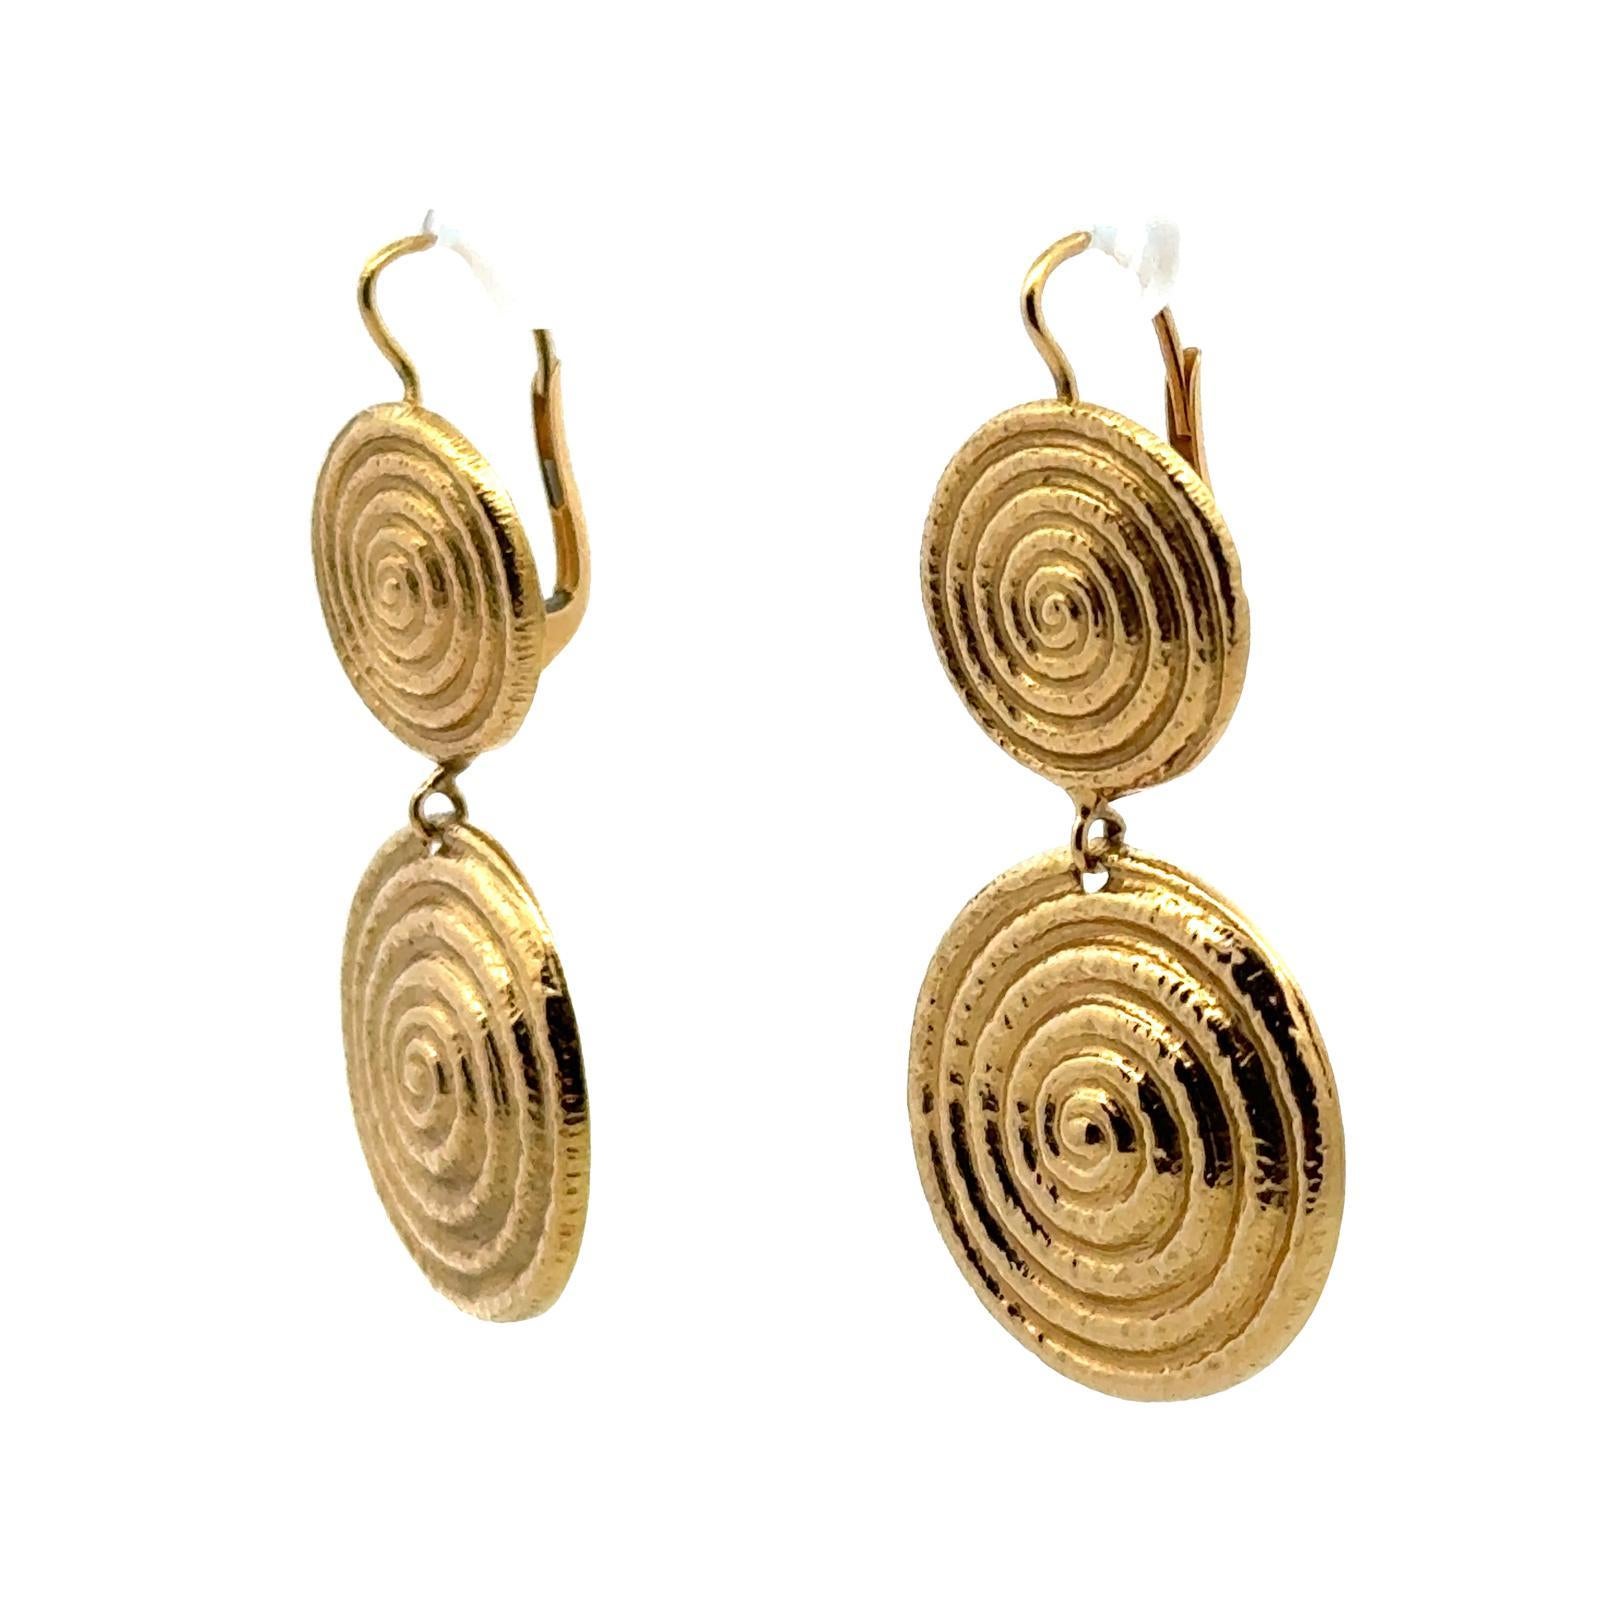 Modern circlular drop earrings offer a contemporary twist on classic elegance. Crafted from 18 karat yellow gold, these earrings  boast a rich, warm hue that exudes luxury. The high karat purity ensures durability and a lasting shine. The earrings